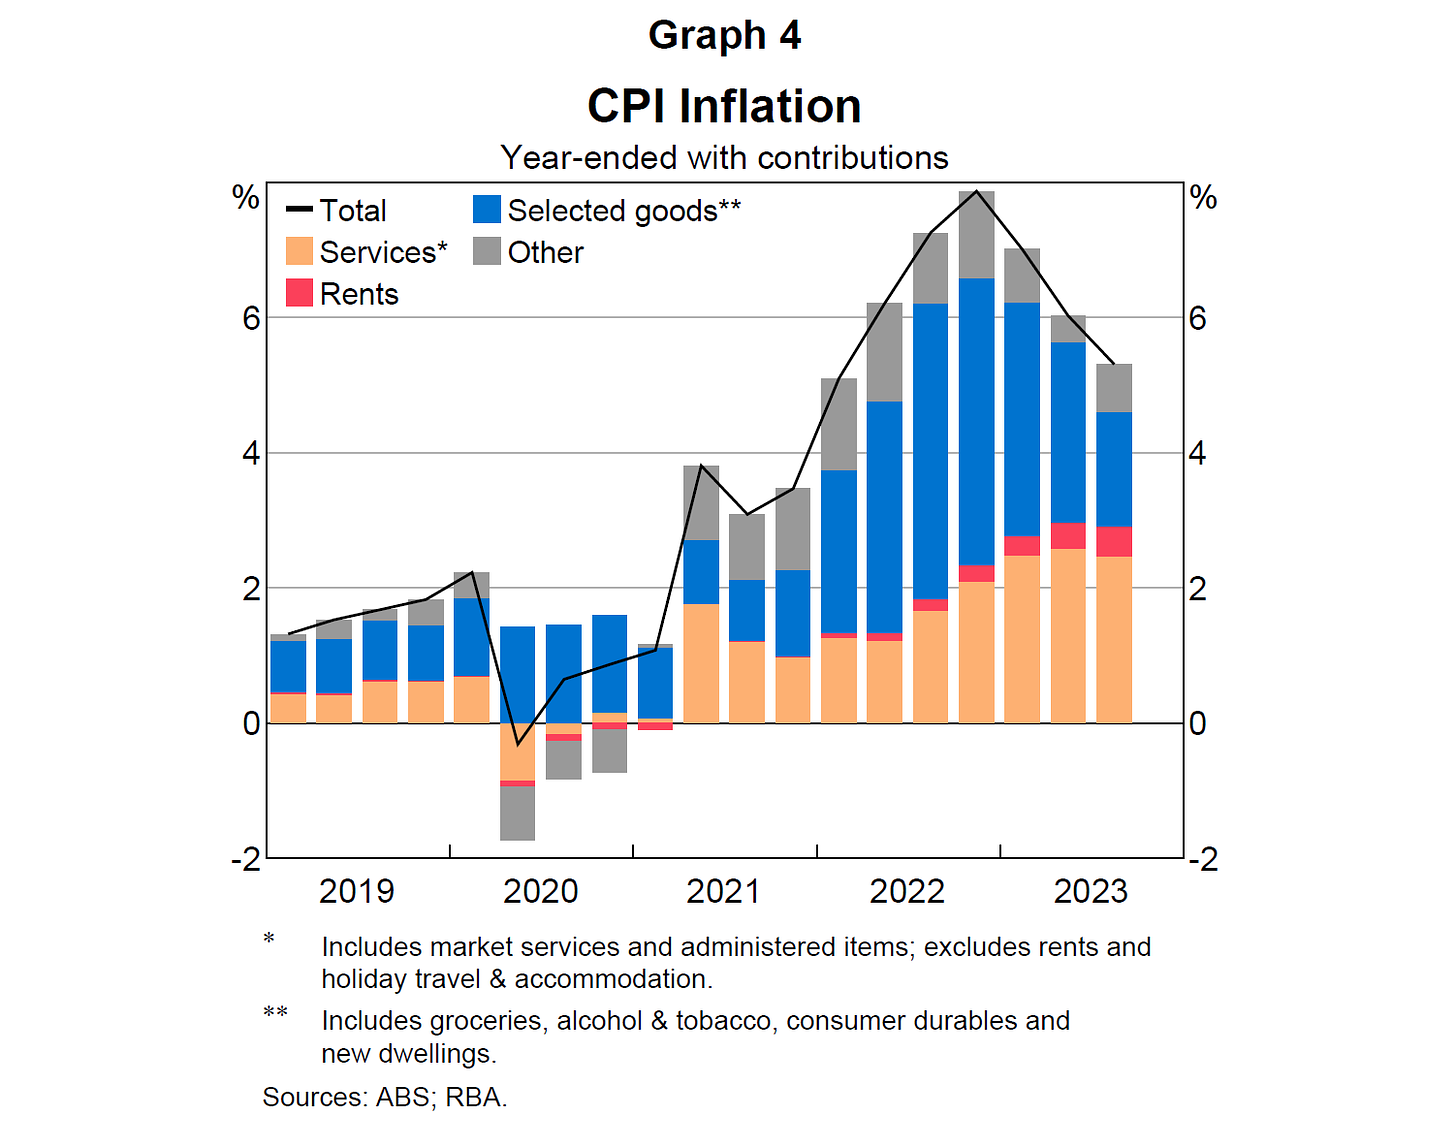 Graph 4: Year-ended CPI Inflation with services, rents, selected goods and other